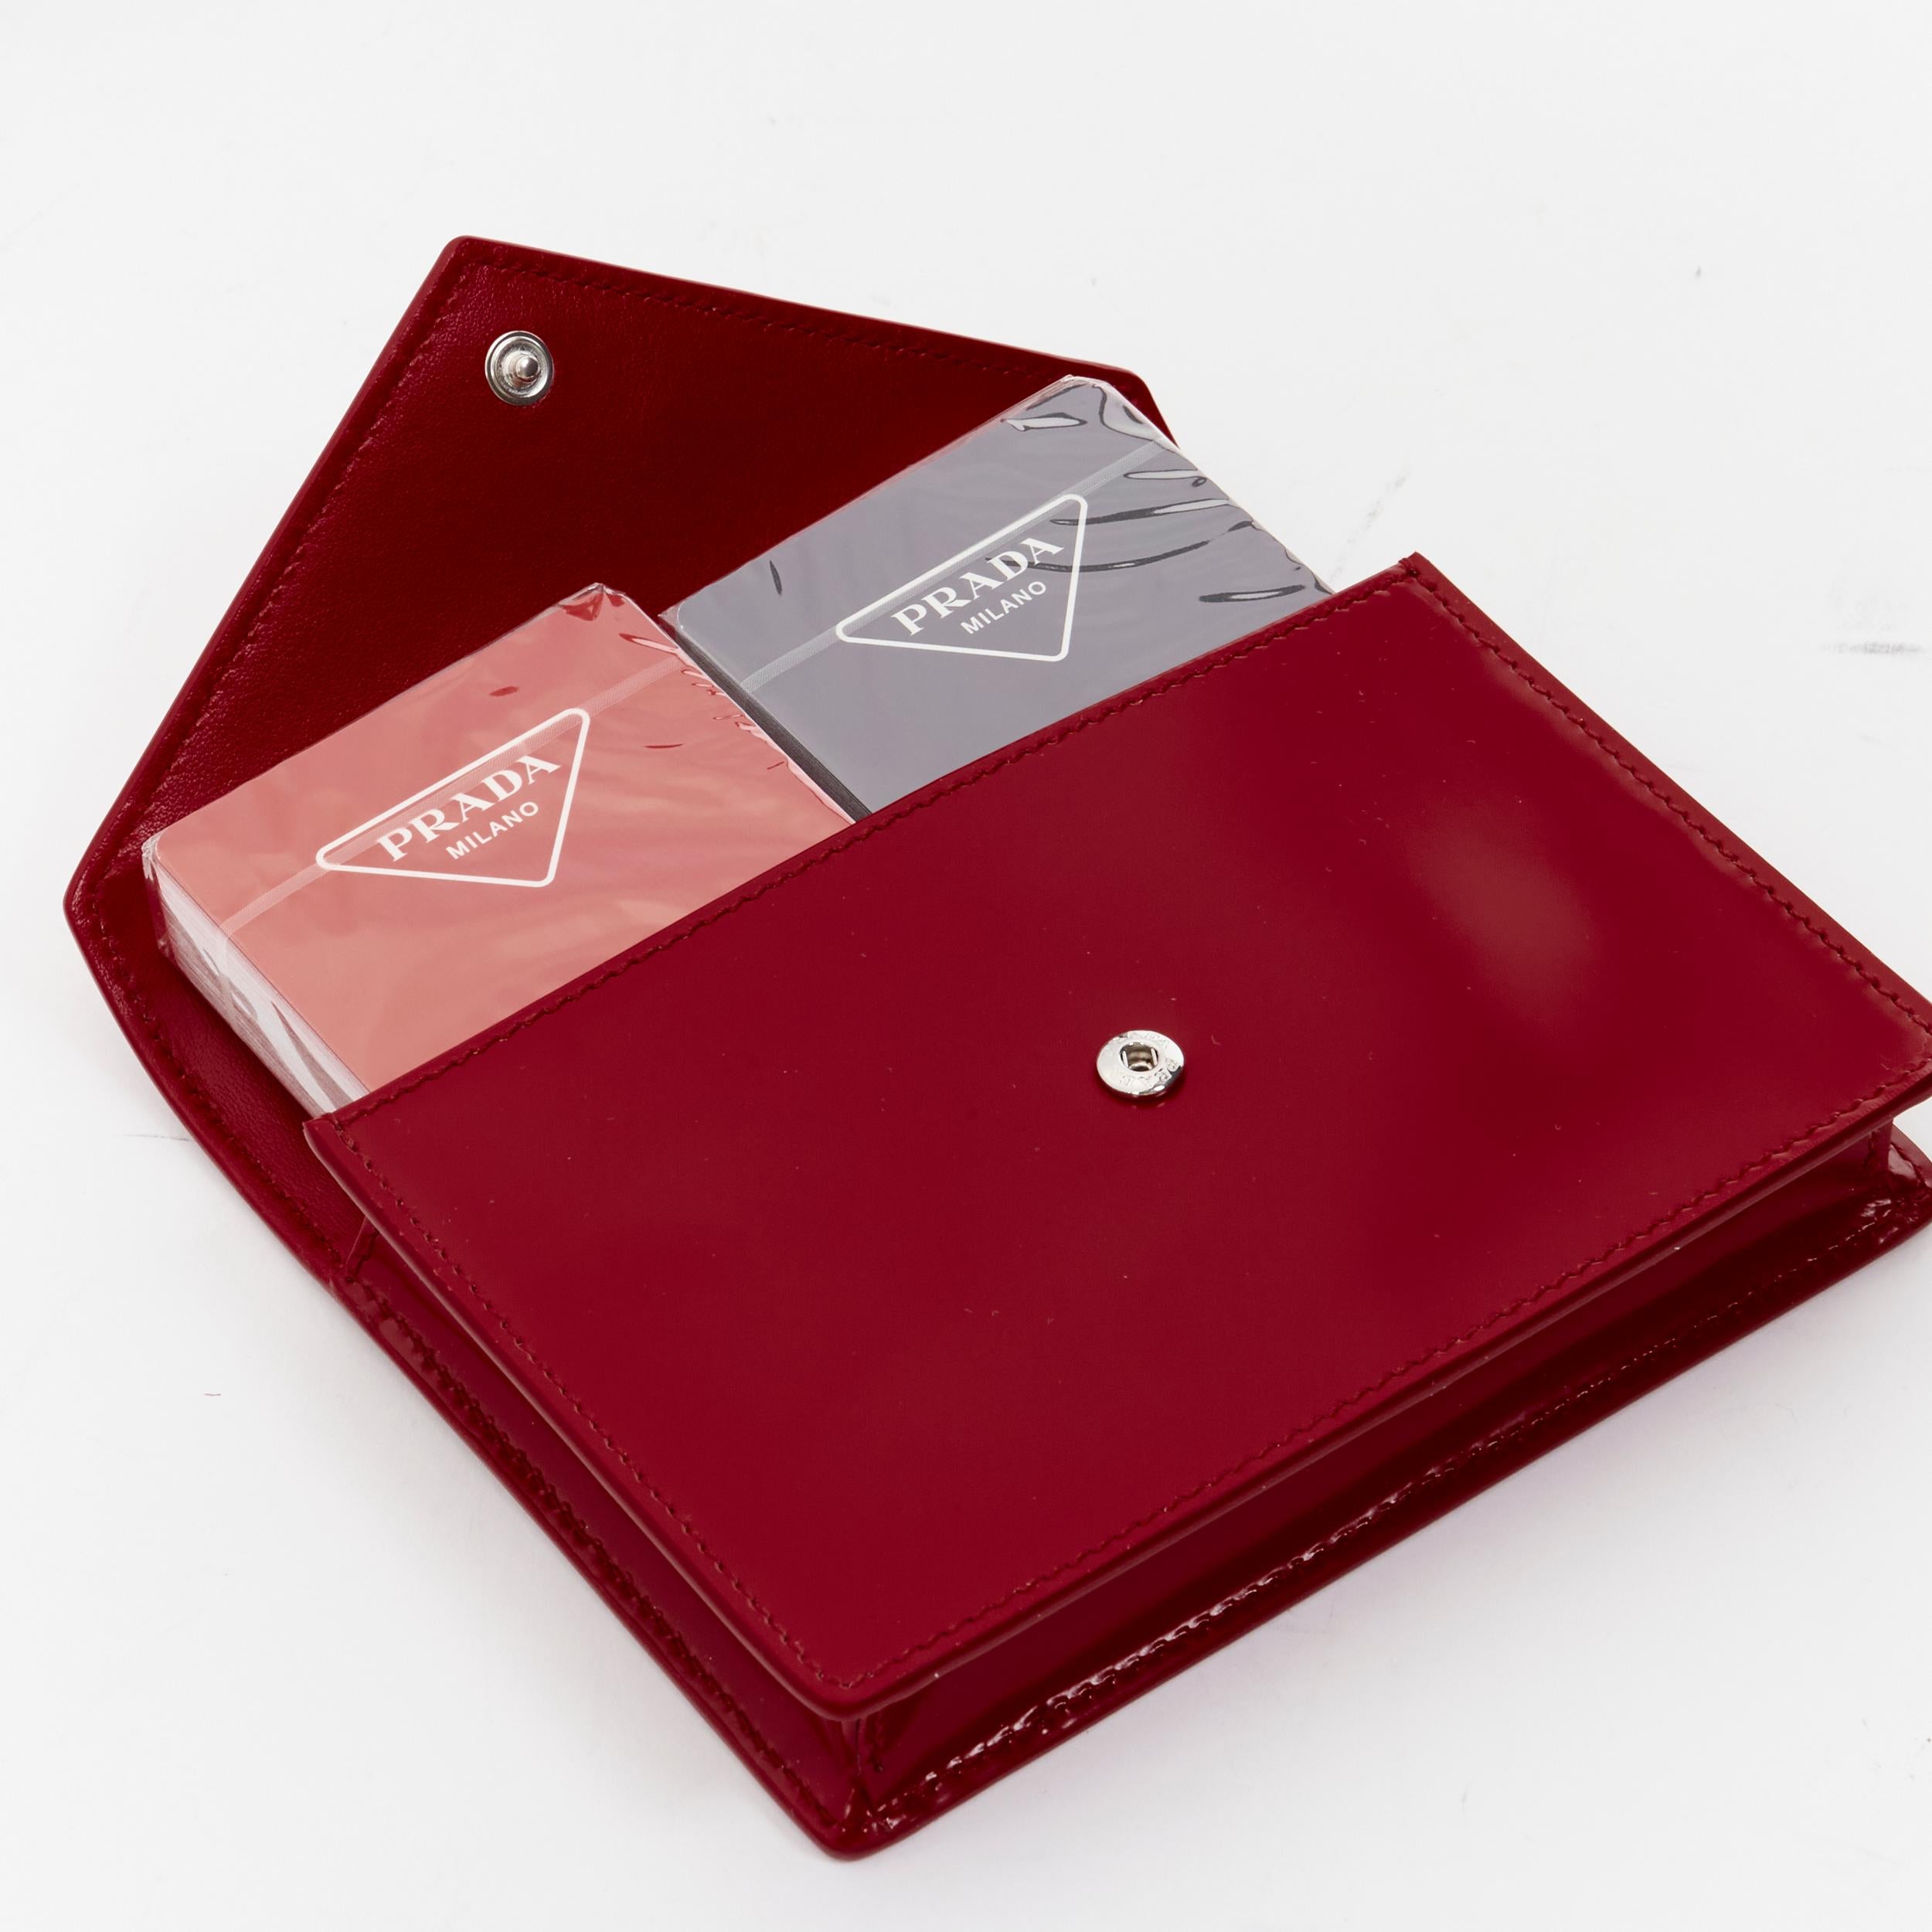 new PRADA 2021 2 pack playing cards red triangle logo envelop case pouch clutch 
Reference: JOMK/A00040 
Brand: Prada 
Designer: Miuccia Prada 
Material: Leather 
Color: Red 
Pattern: Solid 
Extra Detail: This playing card set with two decks comes